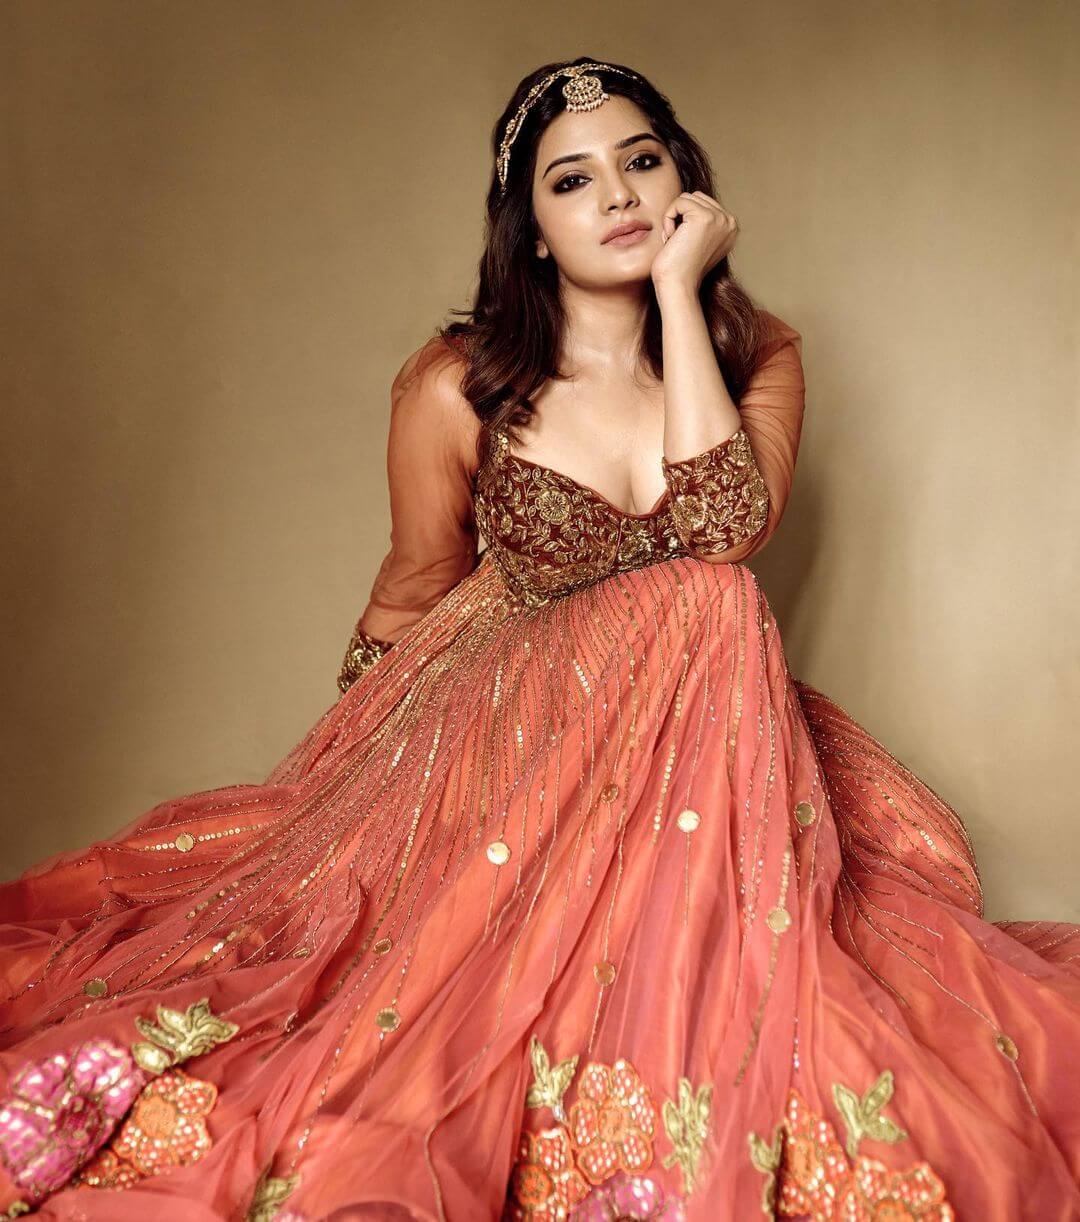 Aathmika In Maroon & Orange Deep Sweetheart Neck Golden Embroidery Gown Gives Us Royal Vibes